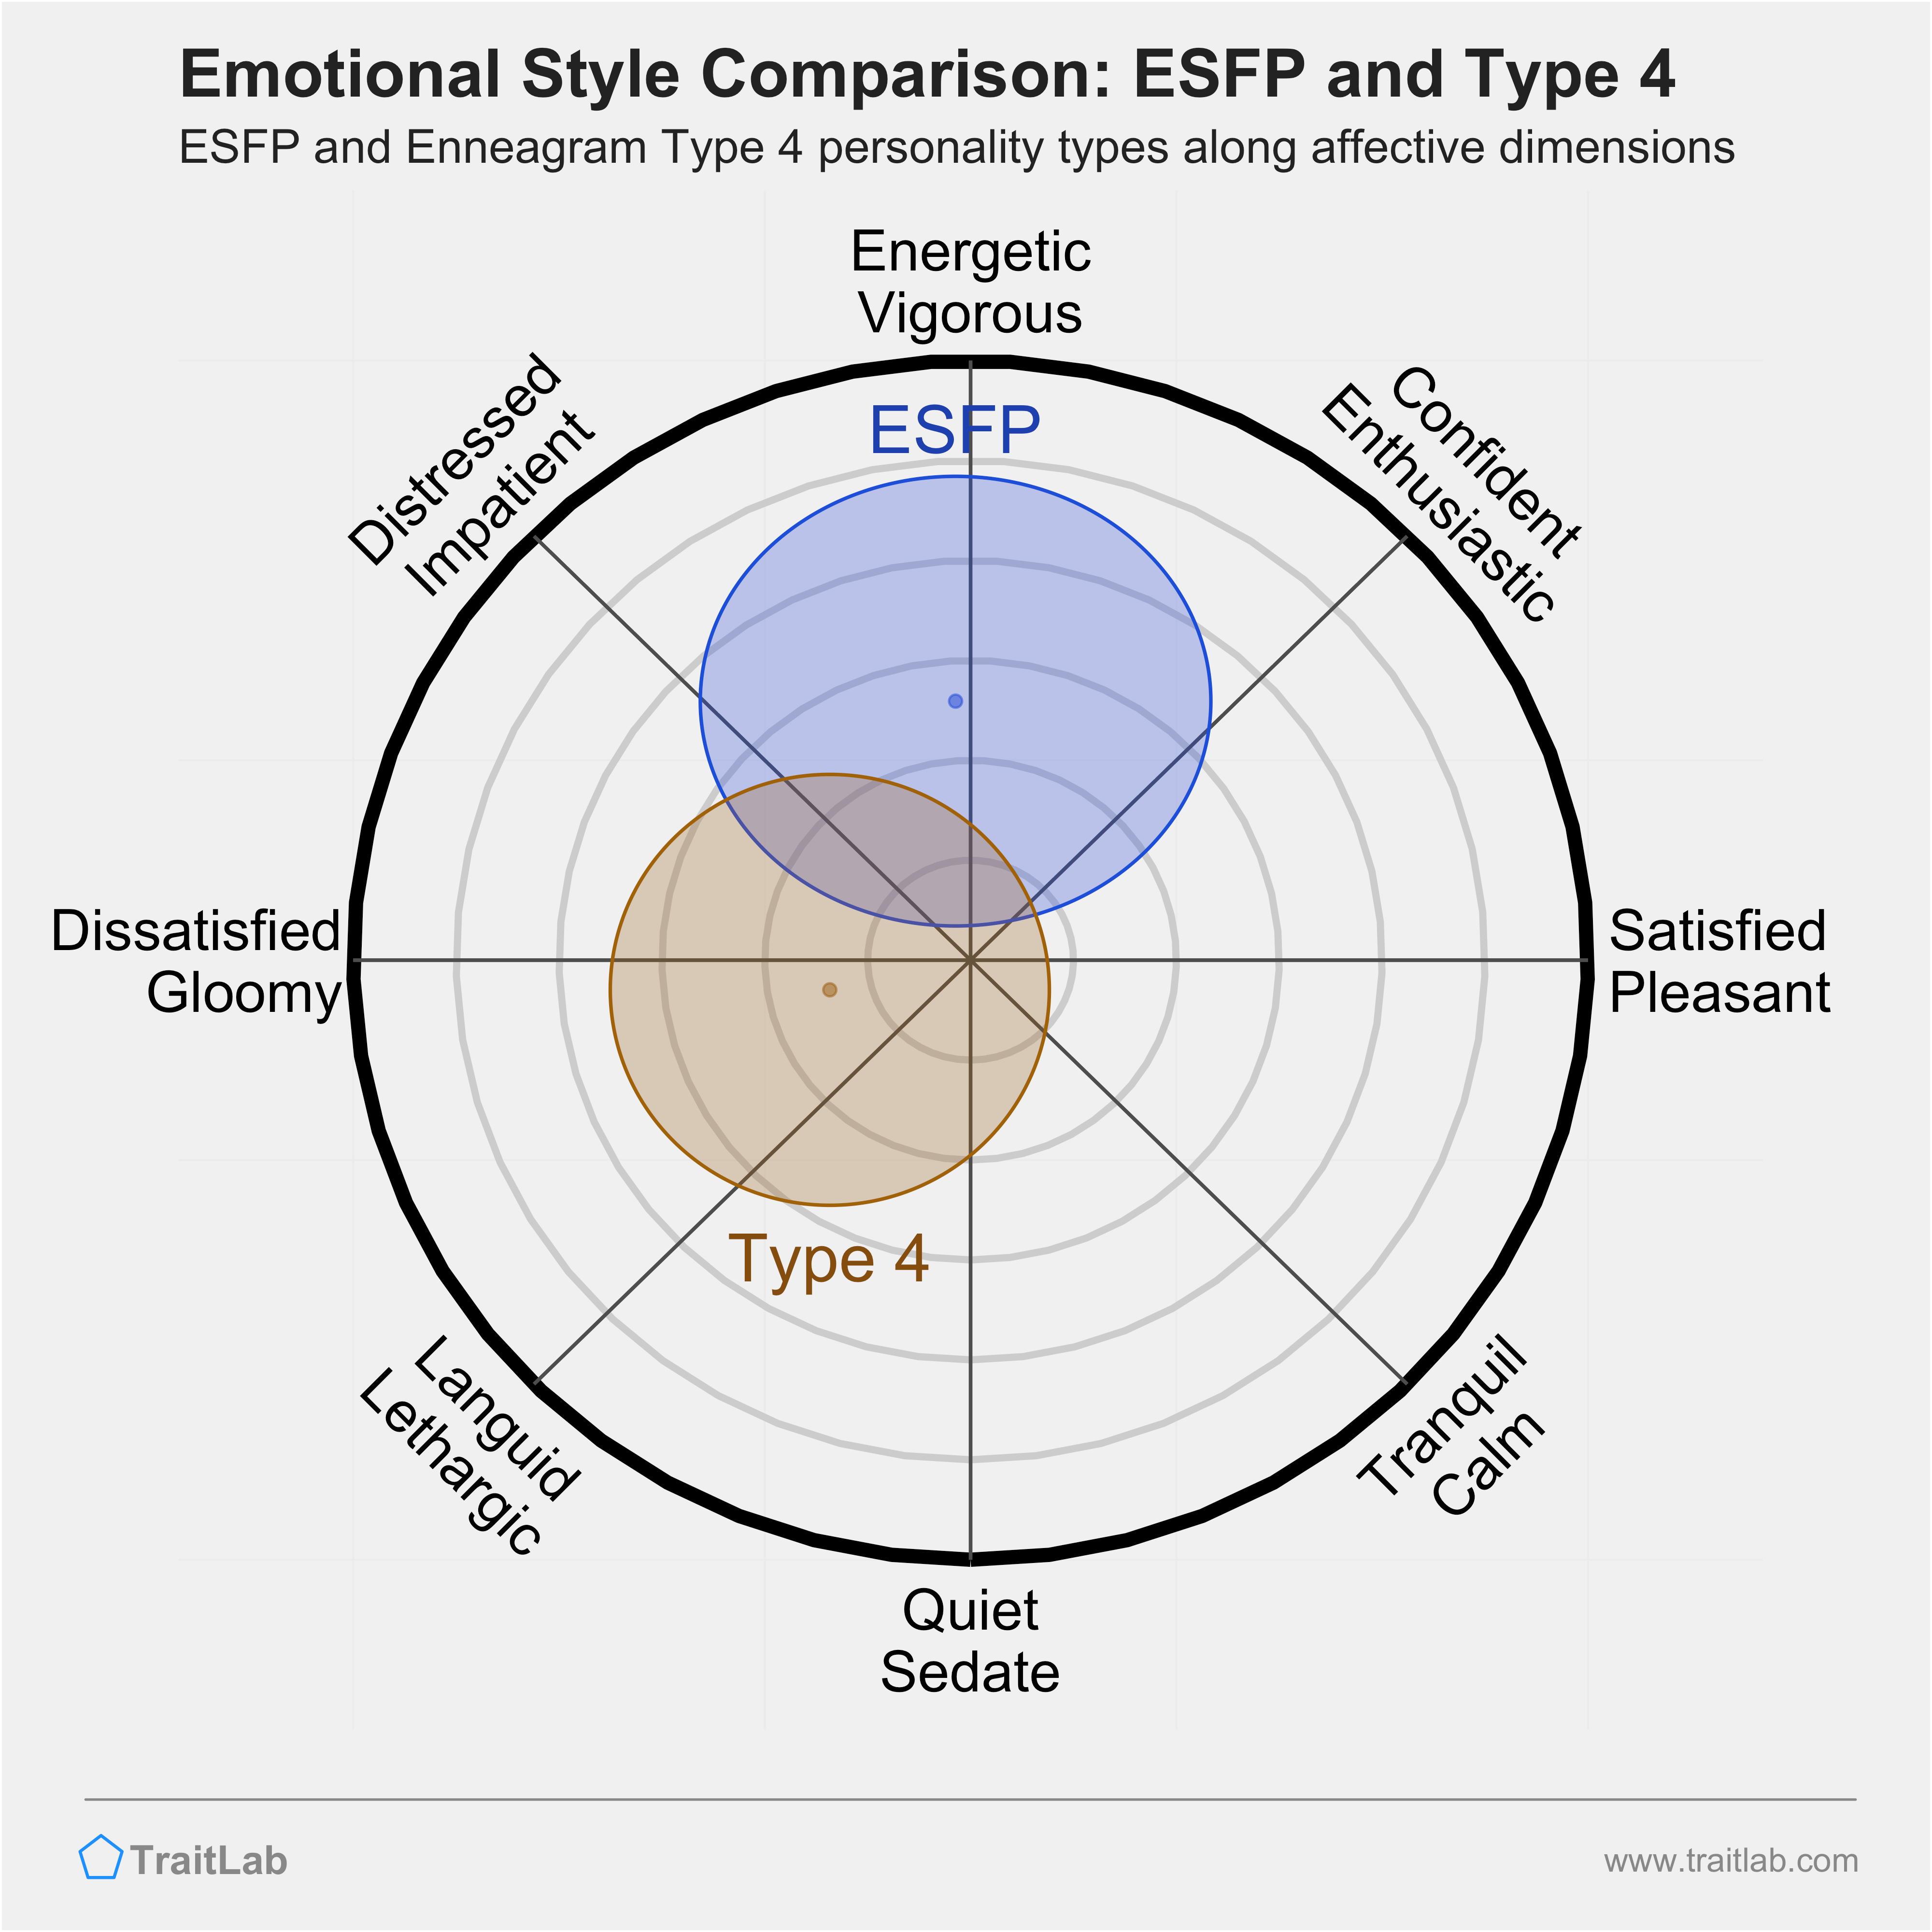 ESFP and Type 4 comparison across emotional (affective) dimensions